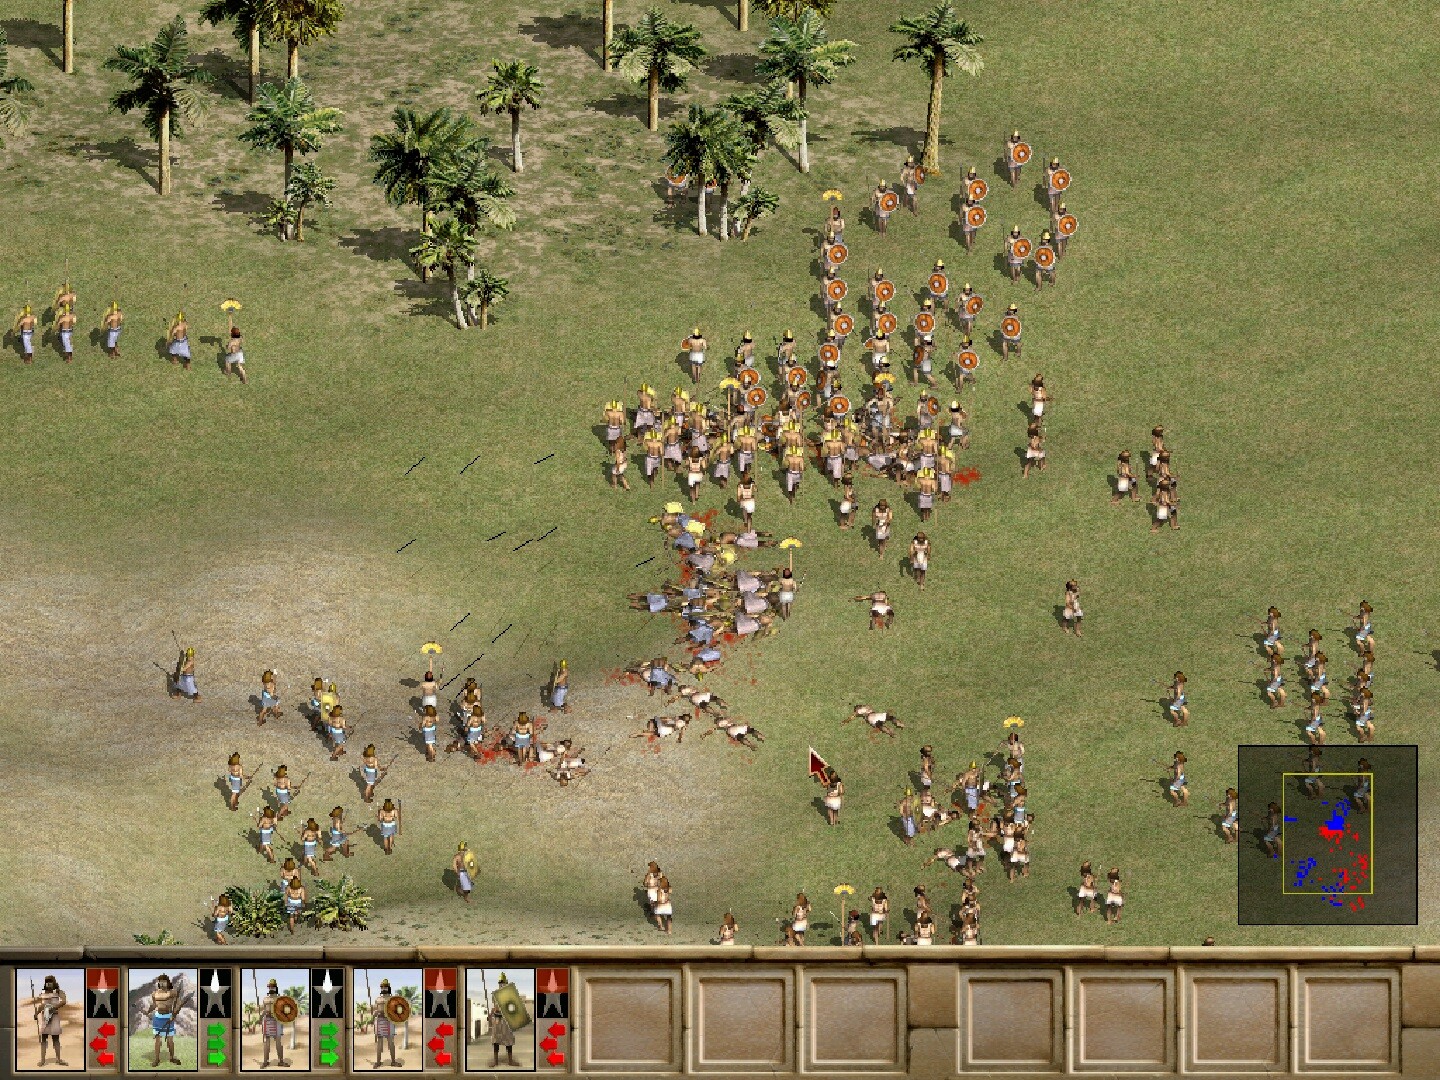 Chariots of War Free Download